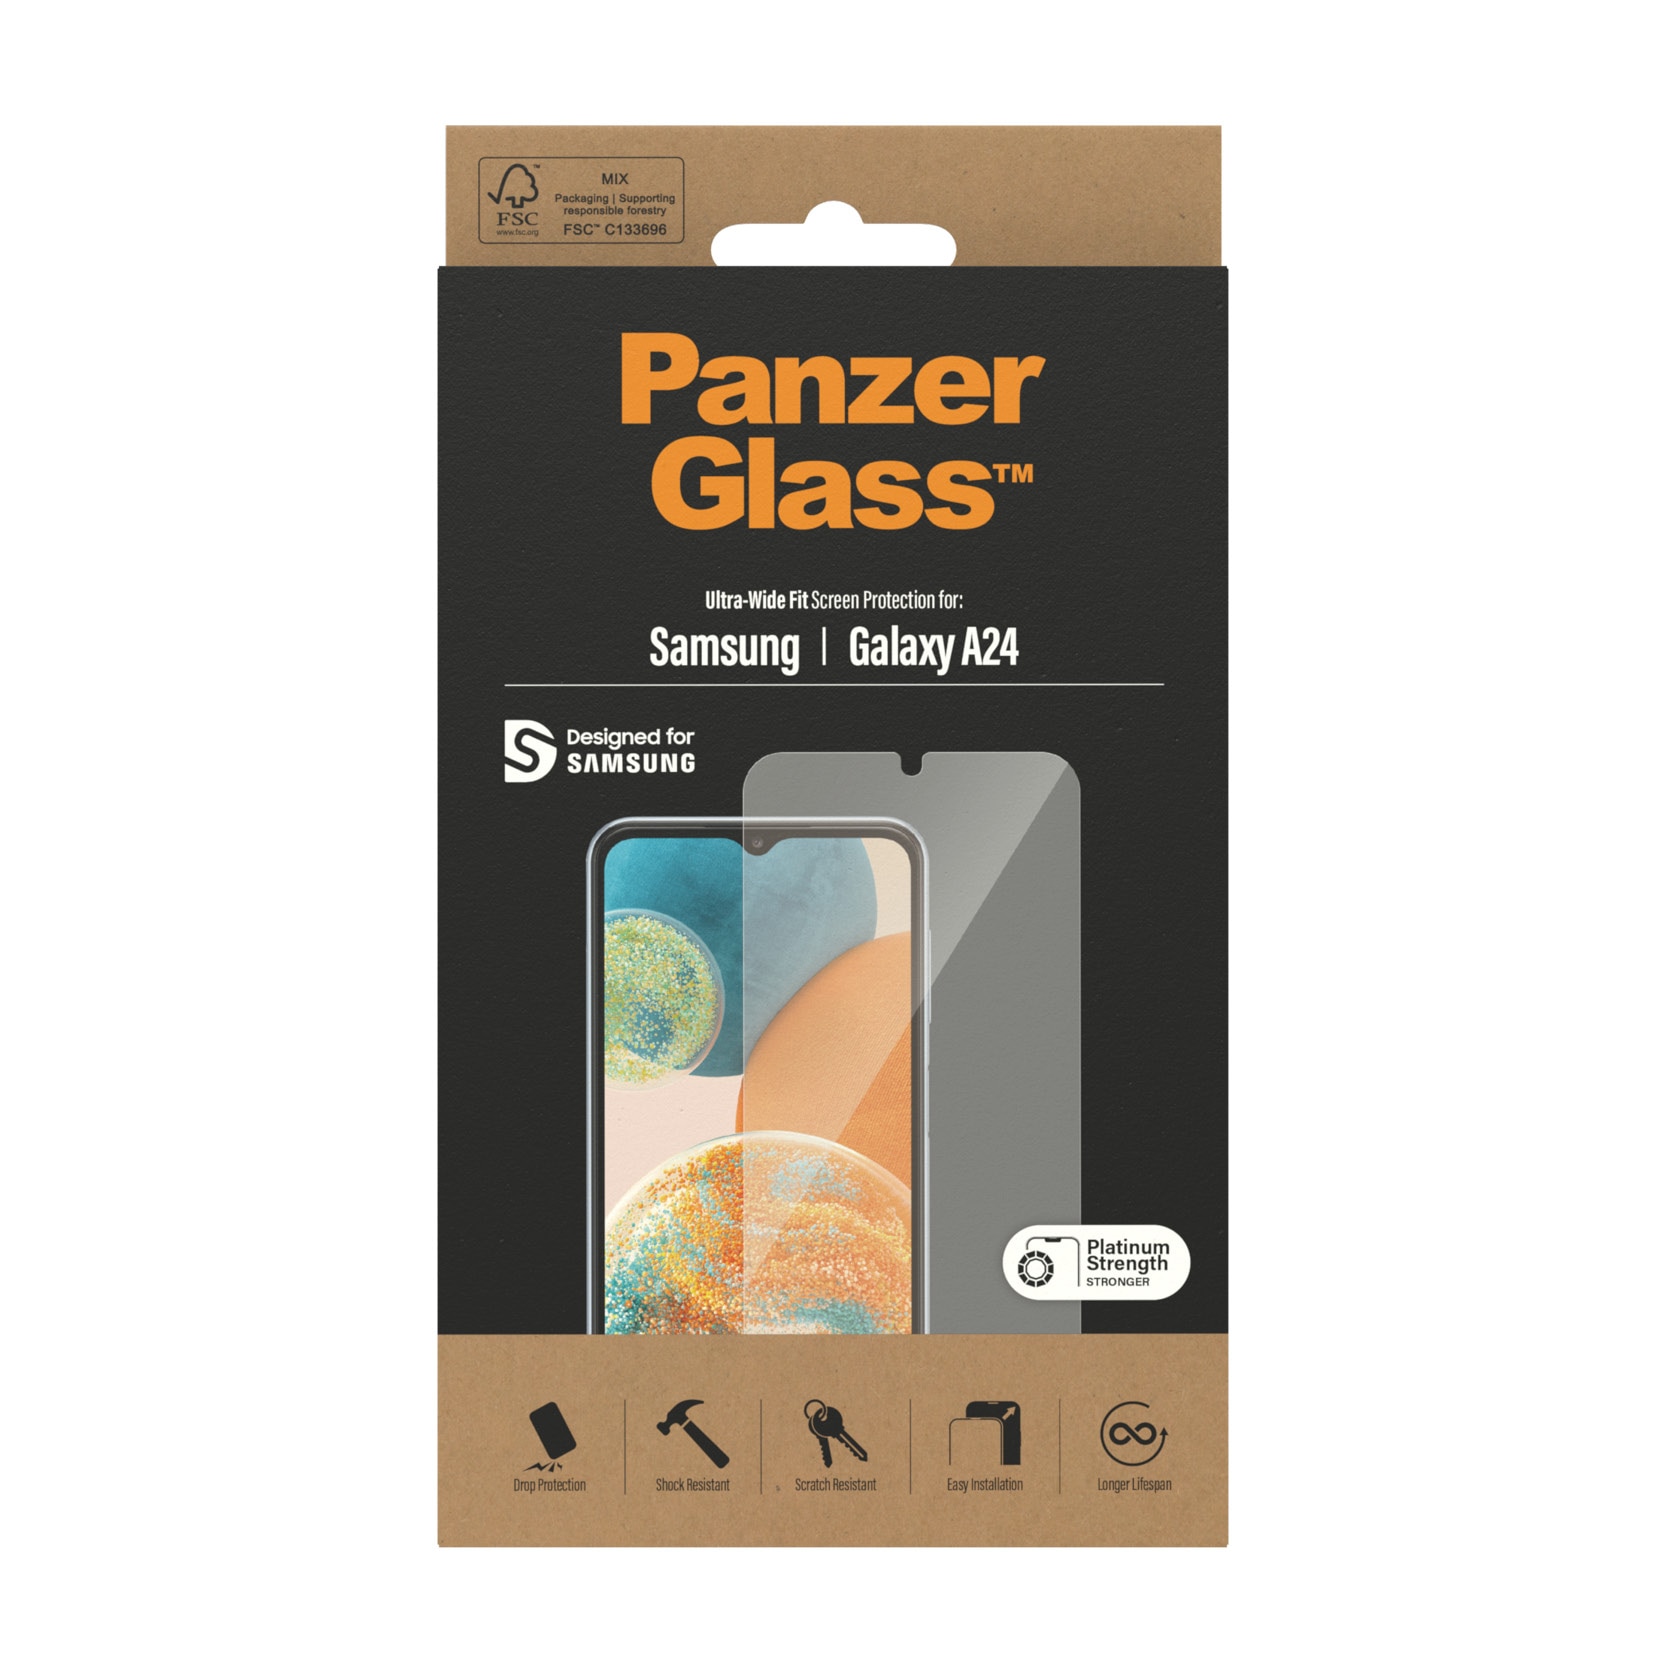 Samsung Galaxy A24 Screen Protector Ultra Wide Fit